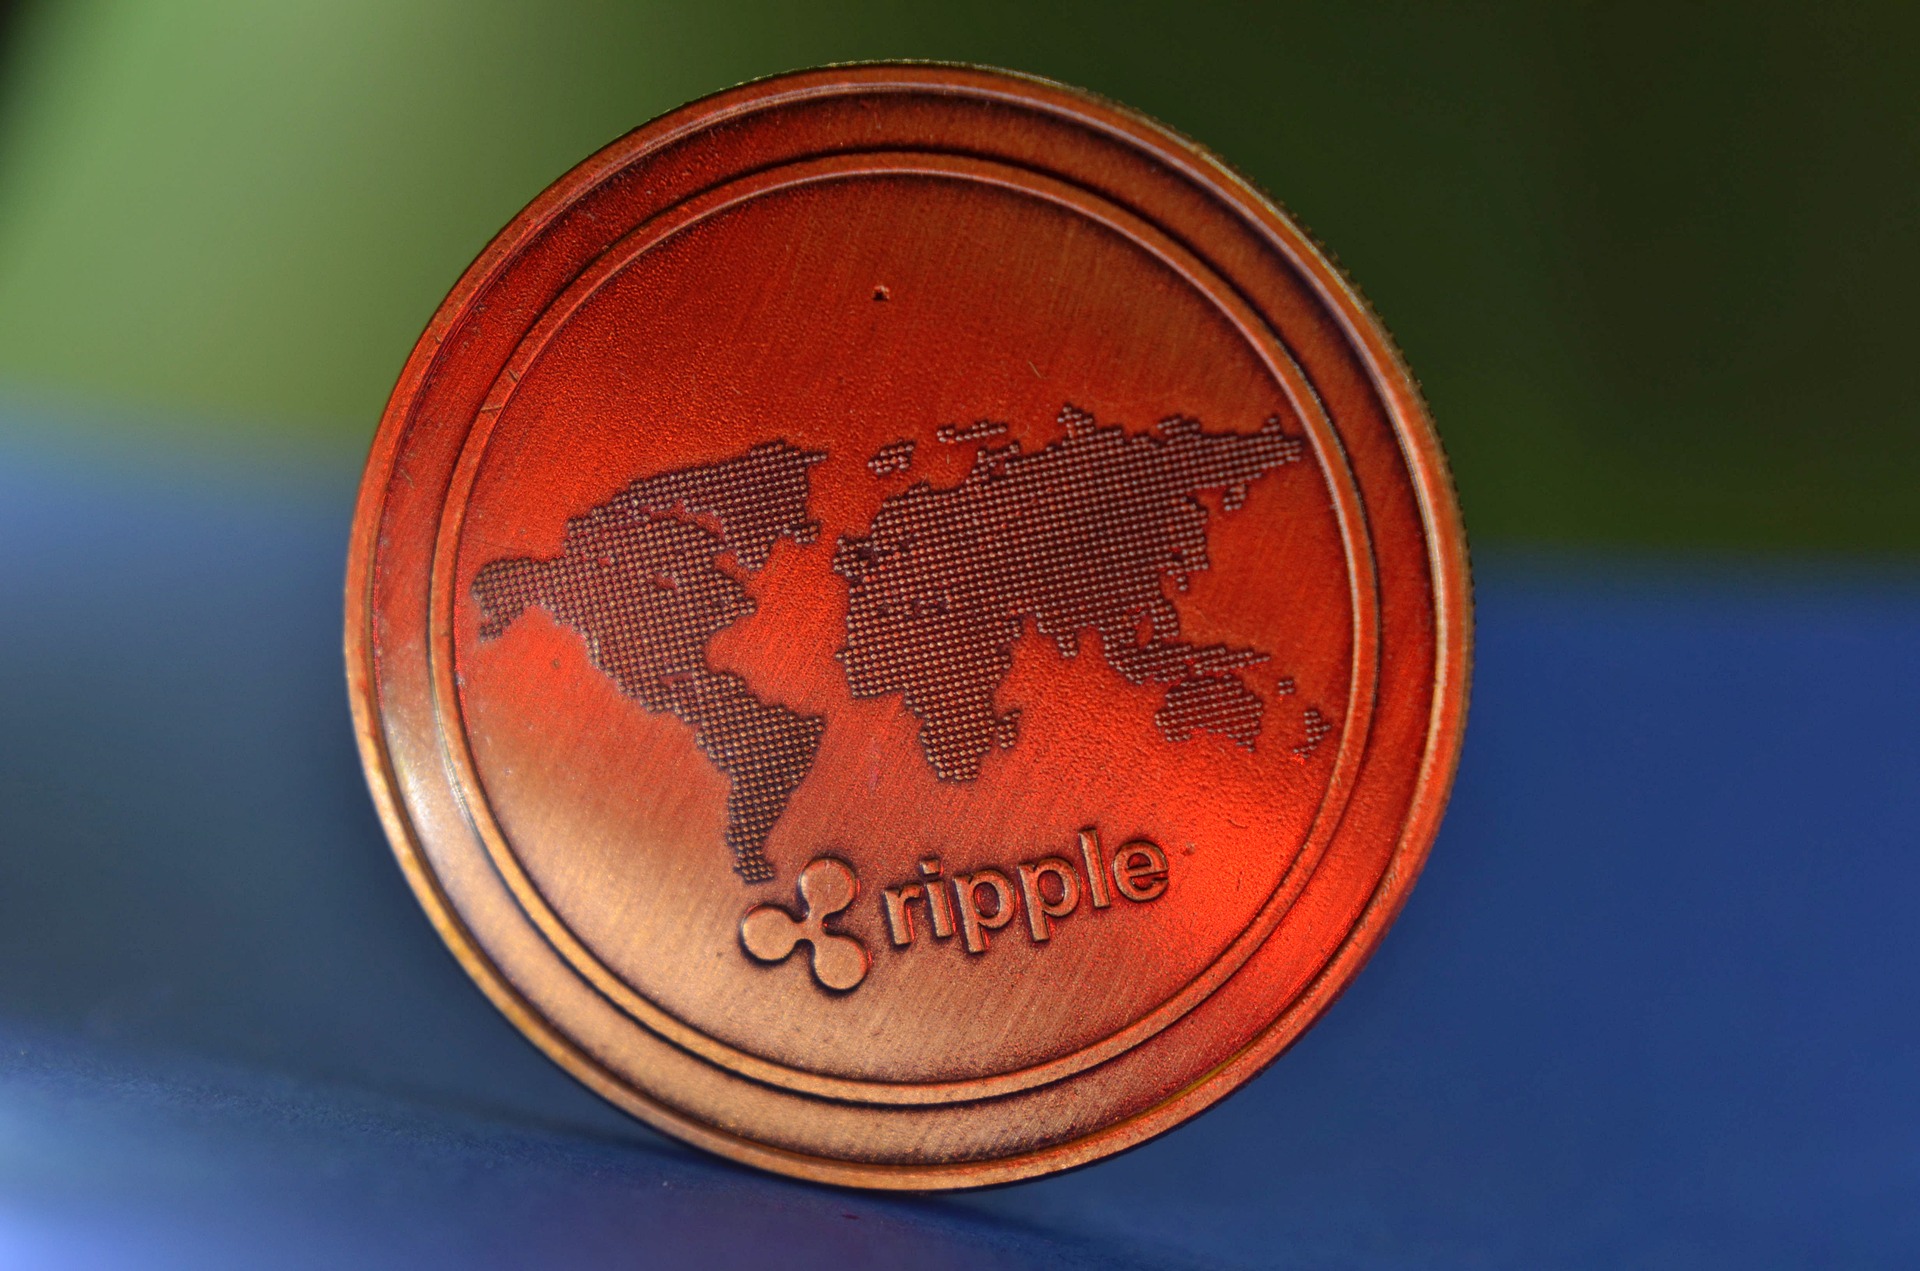 XRP Community Wants Full Media Coverage of the Ripple Labs Lawsuit